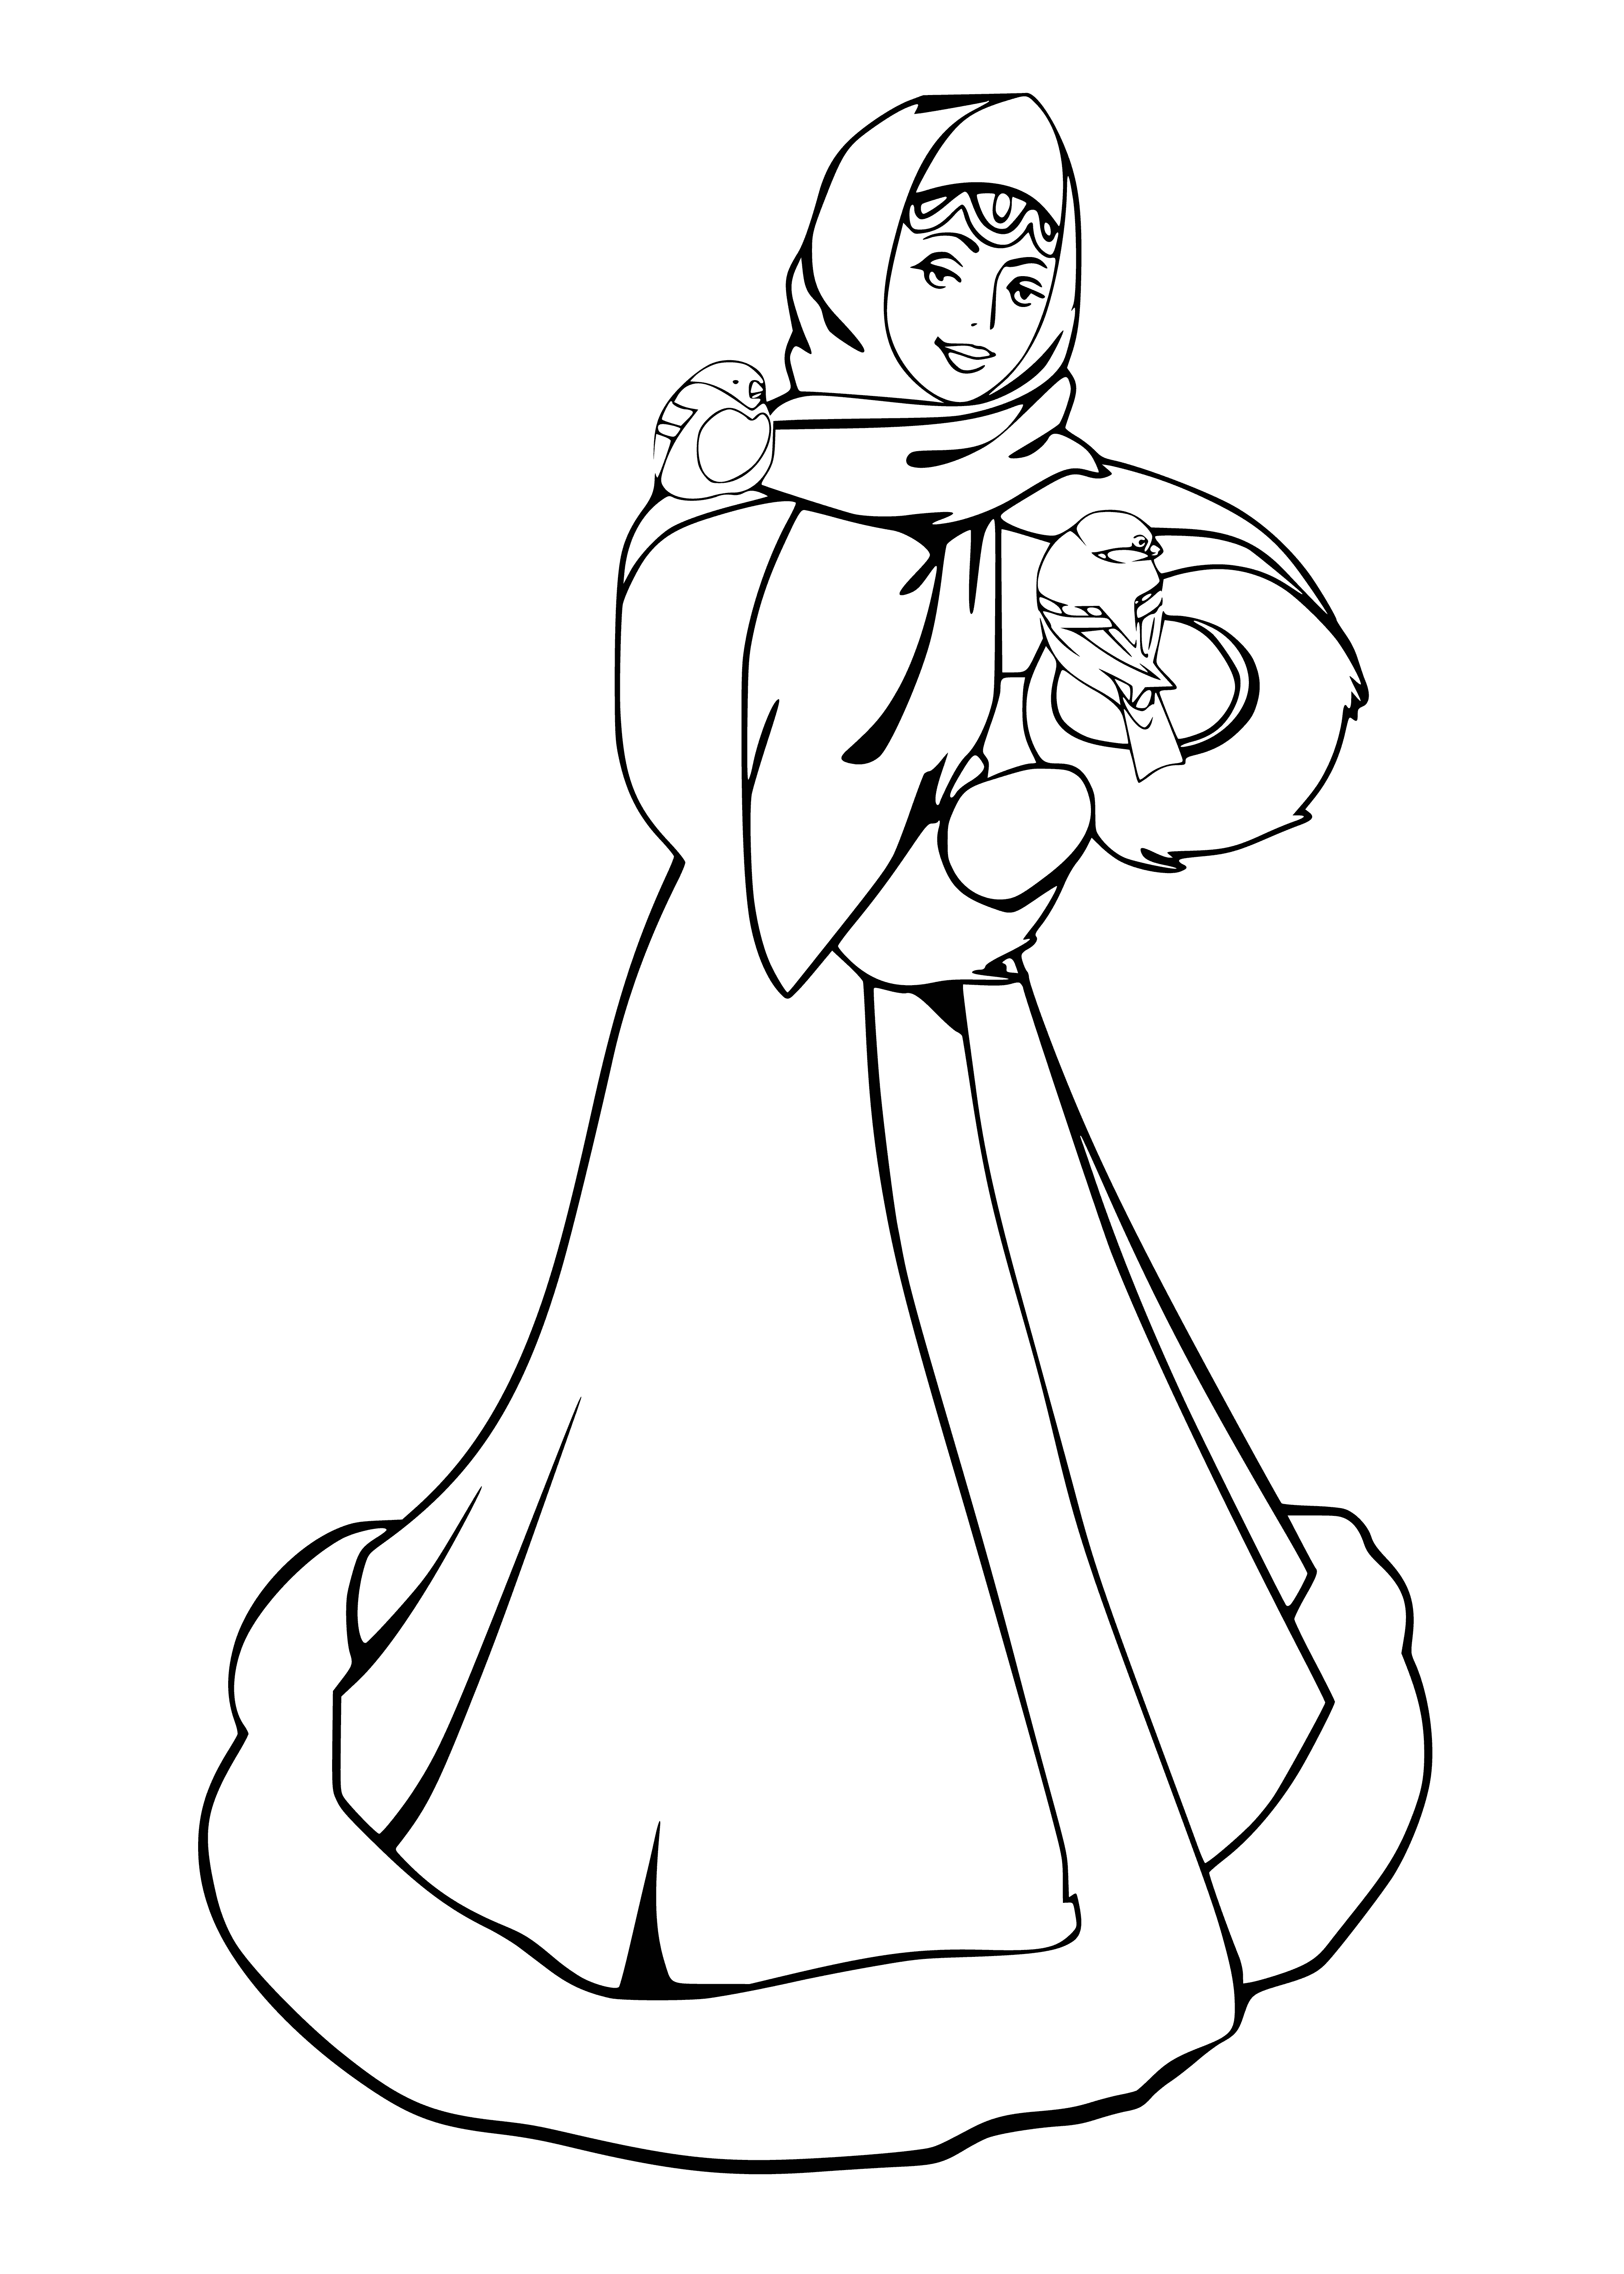 coloring page: Snow Maiden smiles amidst snowfall, bird perched on her shoulder, holding a flower and one hand on her chin.